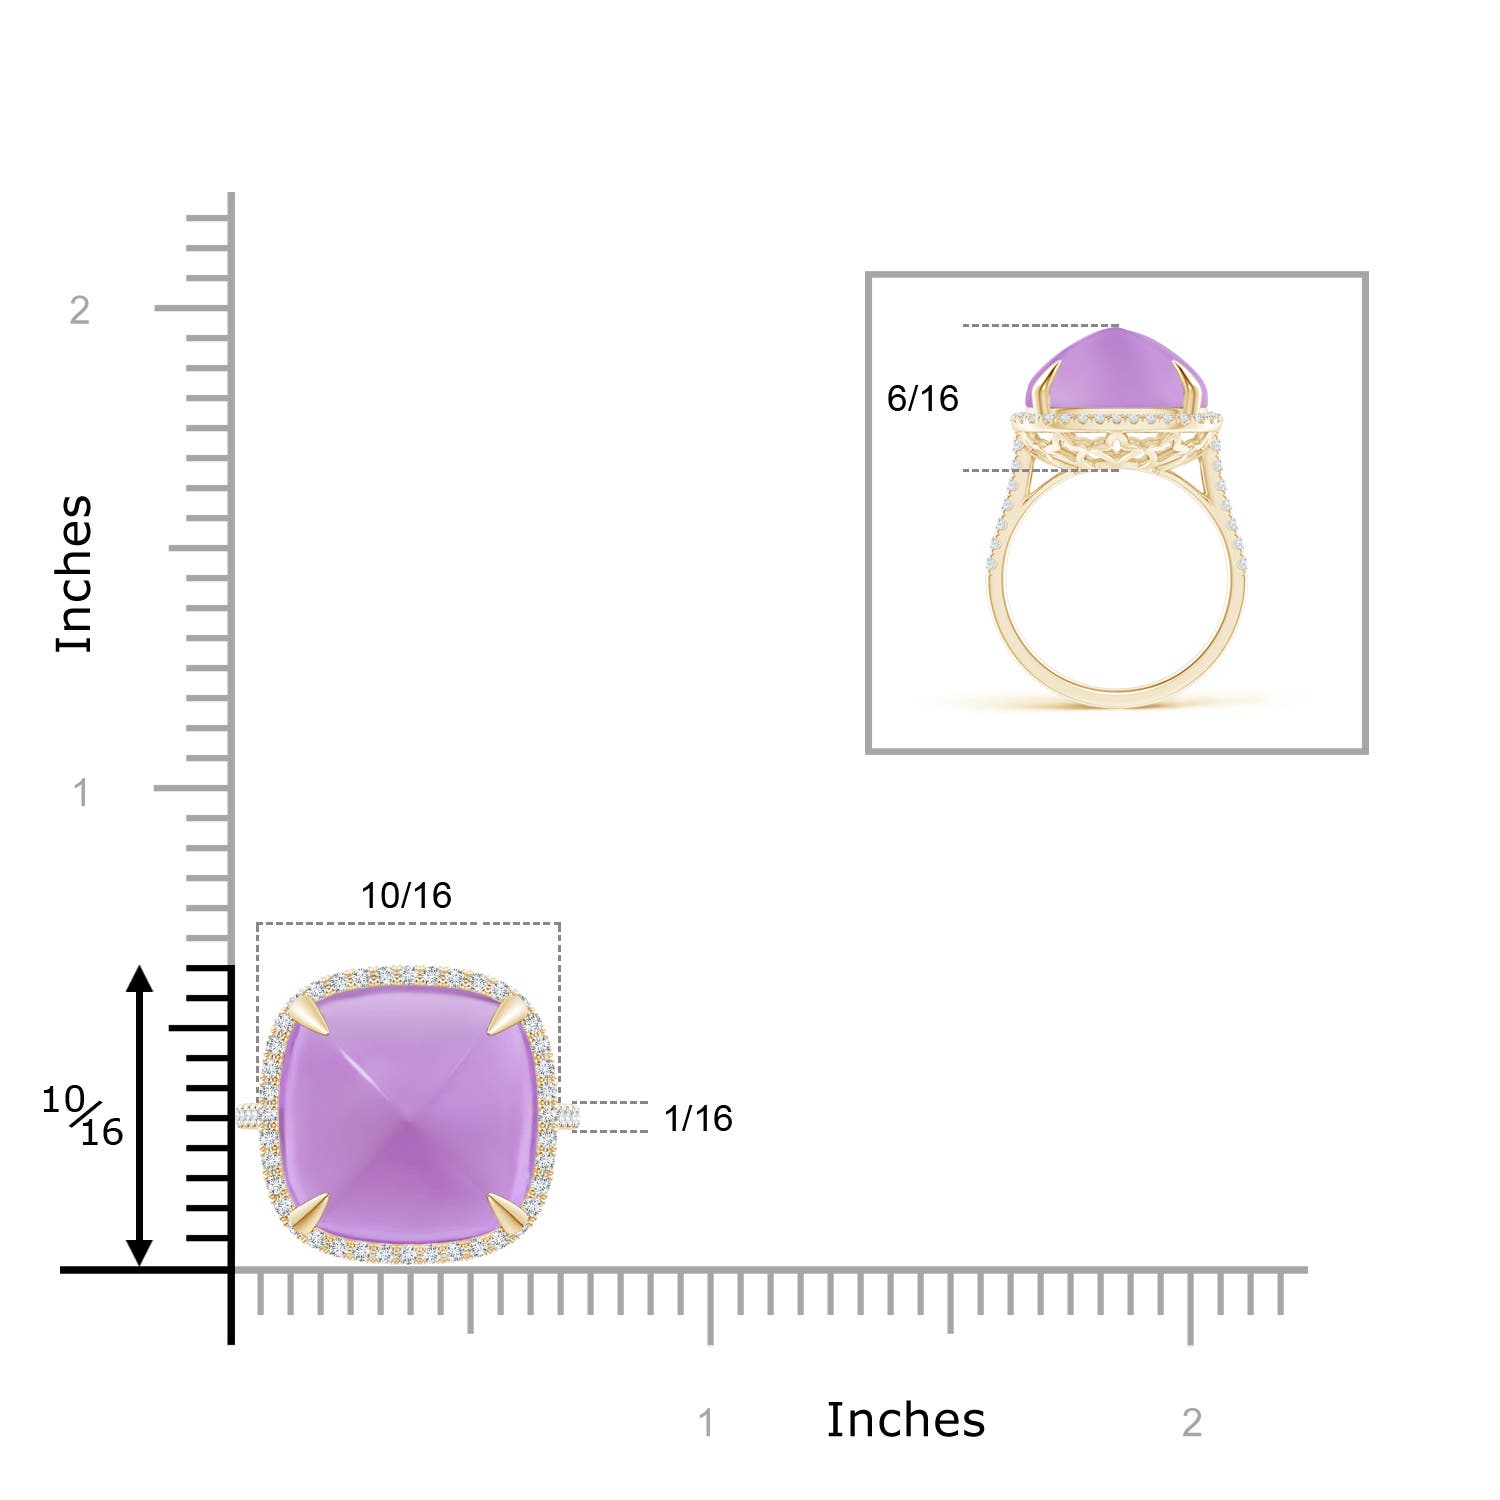 A - Amethyst / 12.91 CT / 14 KT Yellow Gold